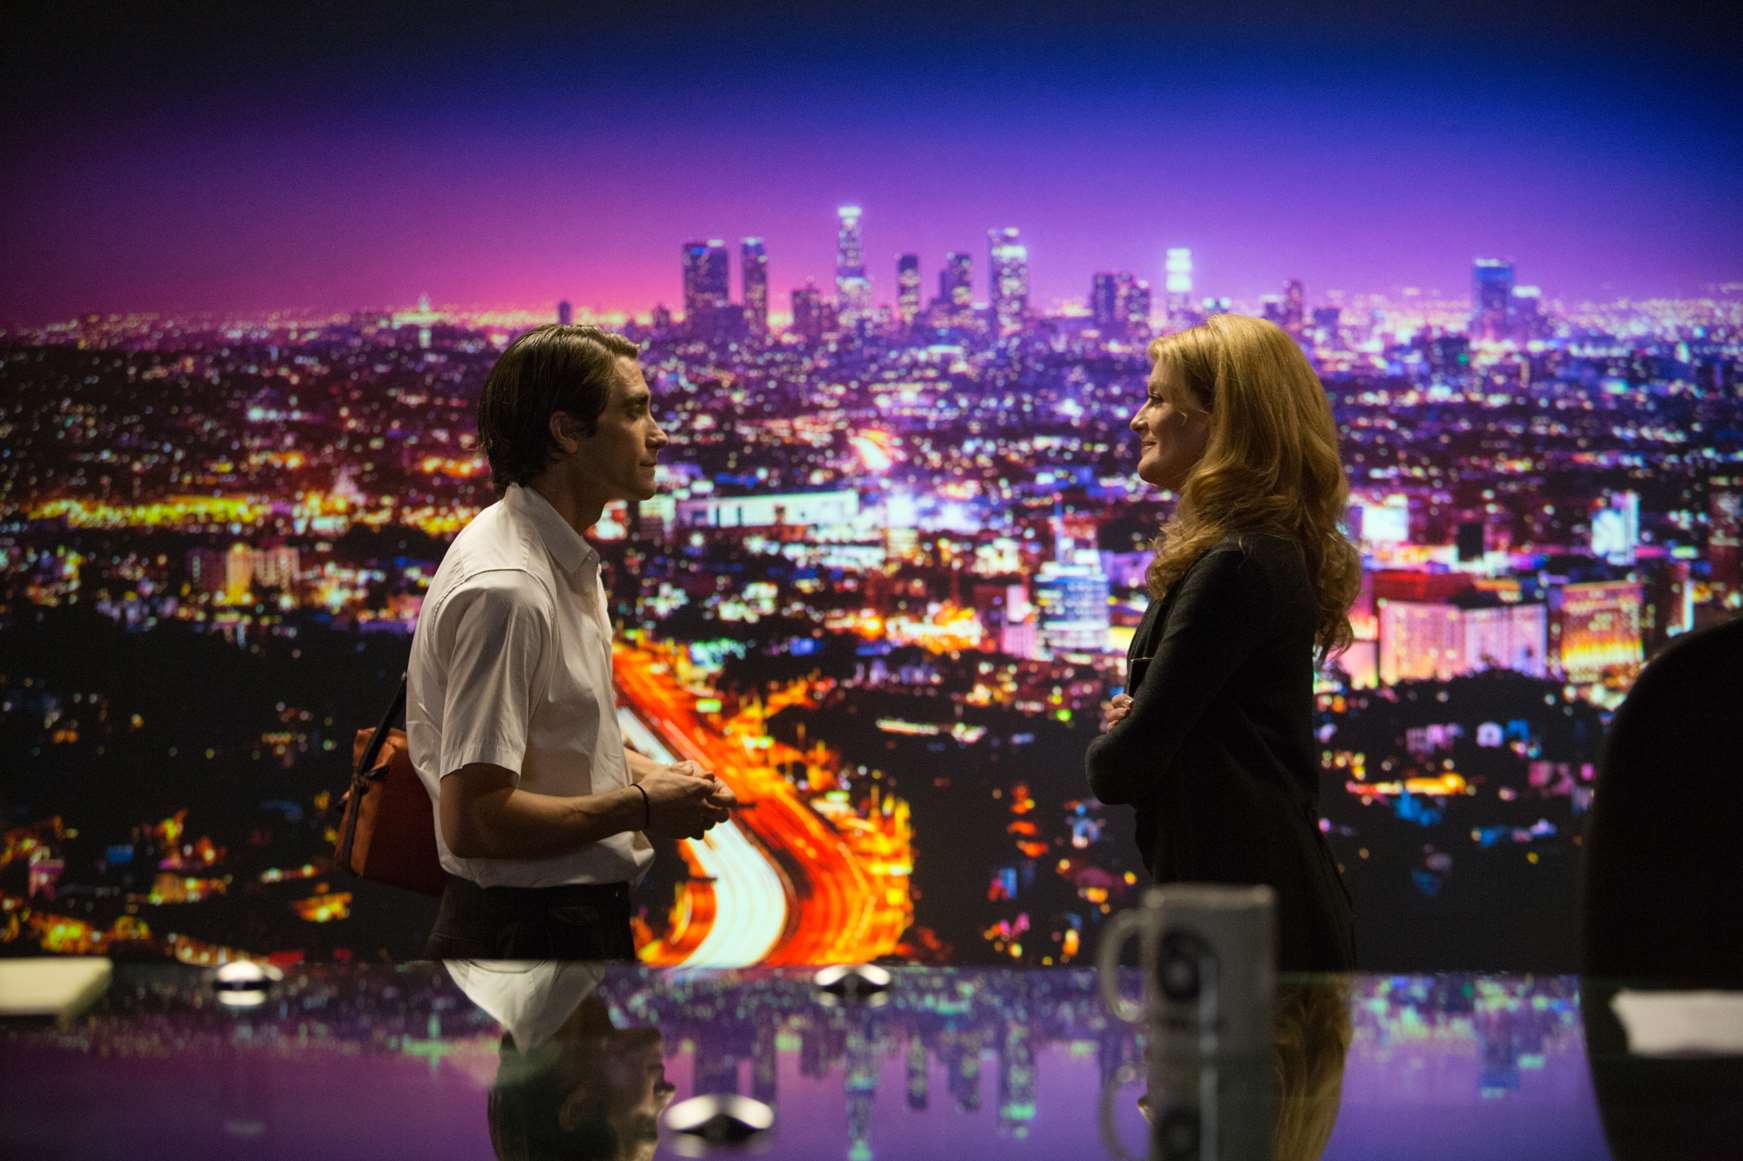 Nightcrtawler, with Jake Gyllenhaas as Lou Bloom and Rene Russo. Picture: PA Photo/Handout/eOnel